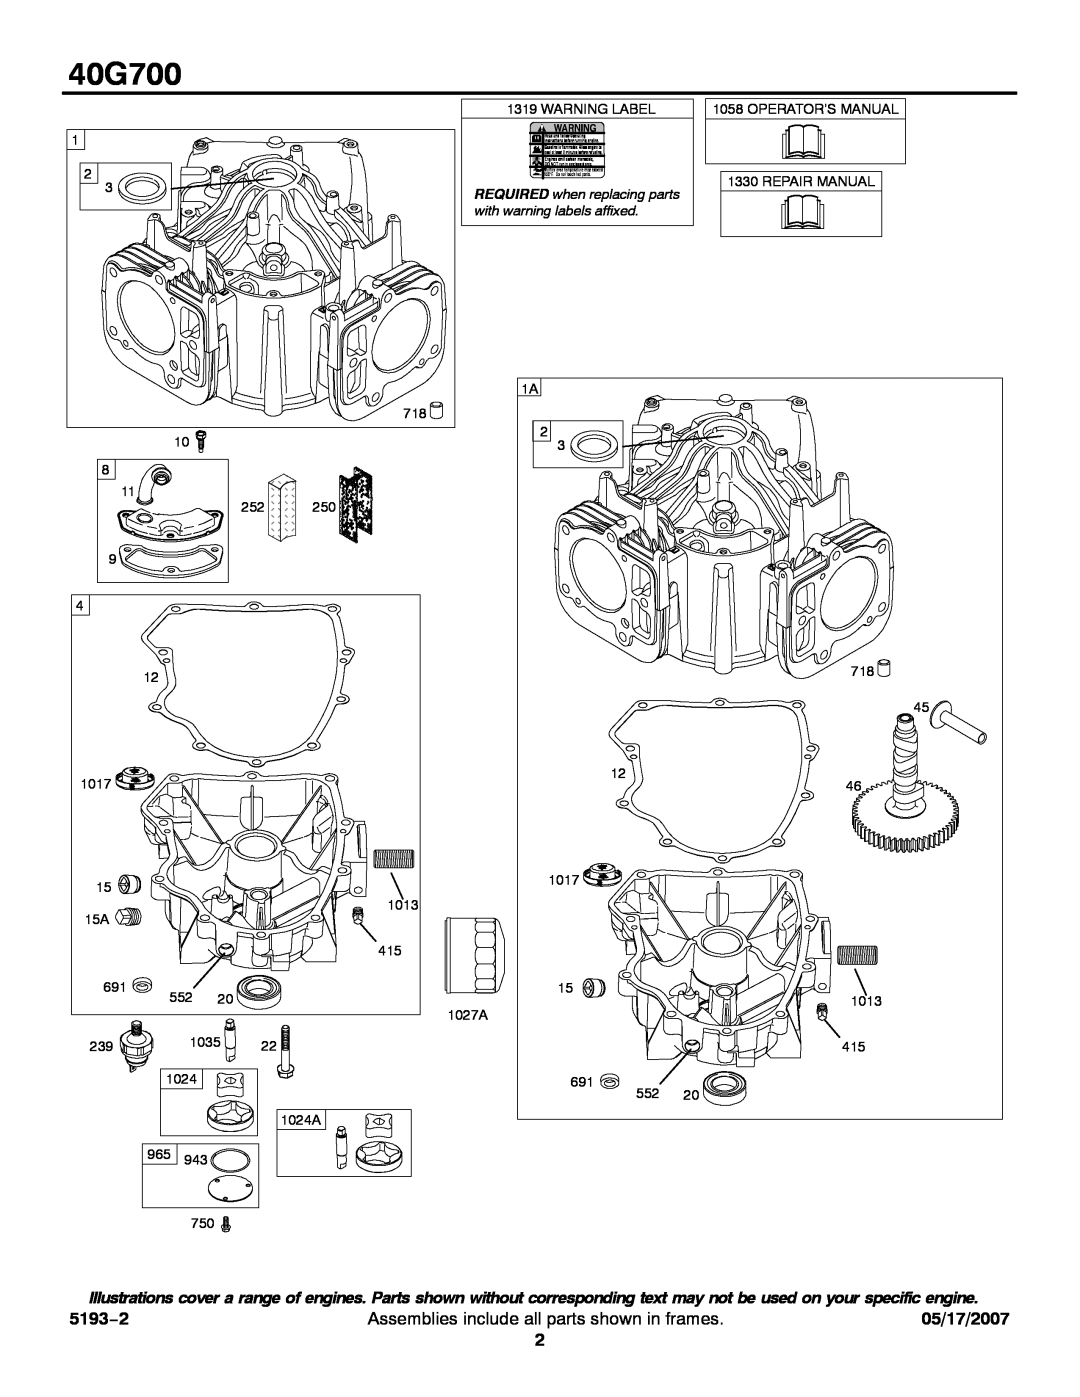 Briggs & Stratton 40G700 5193−2, Assemblies include all parts shown in frames, 05/17/2007, with warning labels affixed 